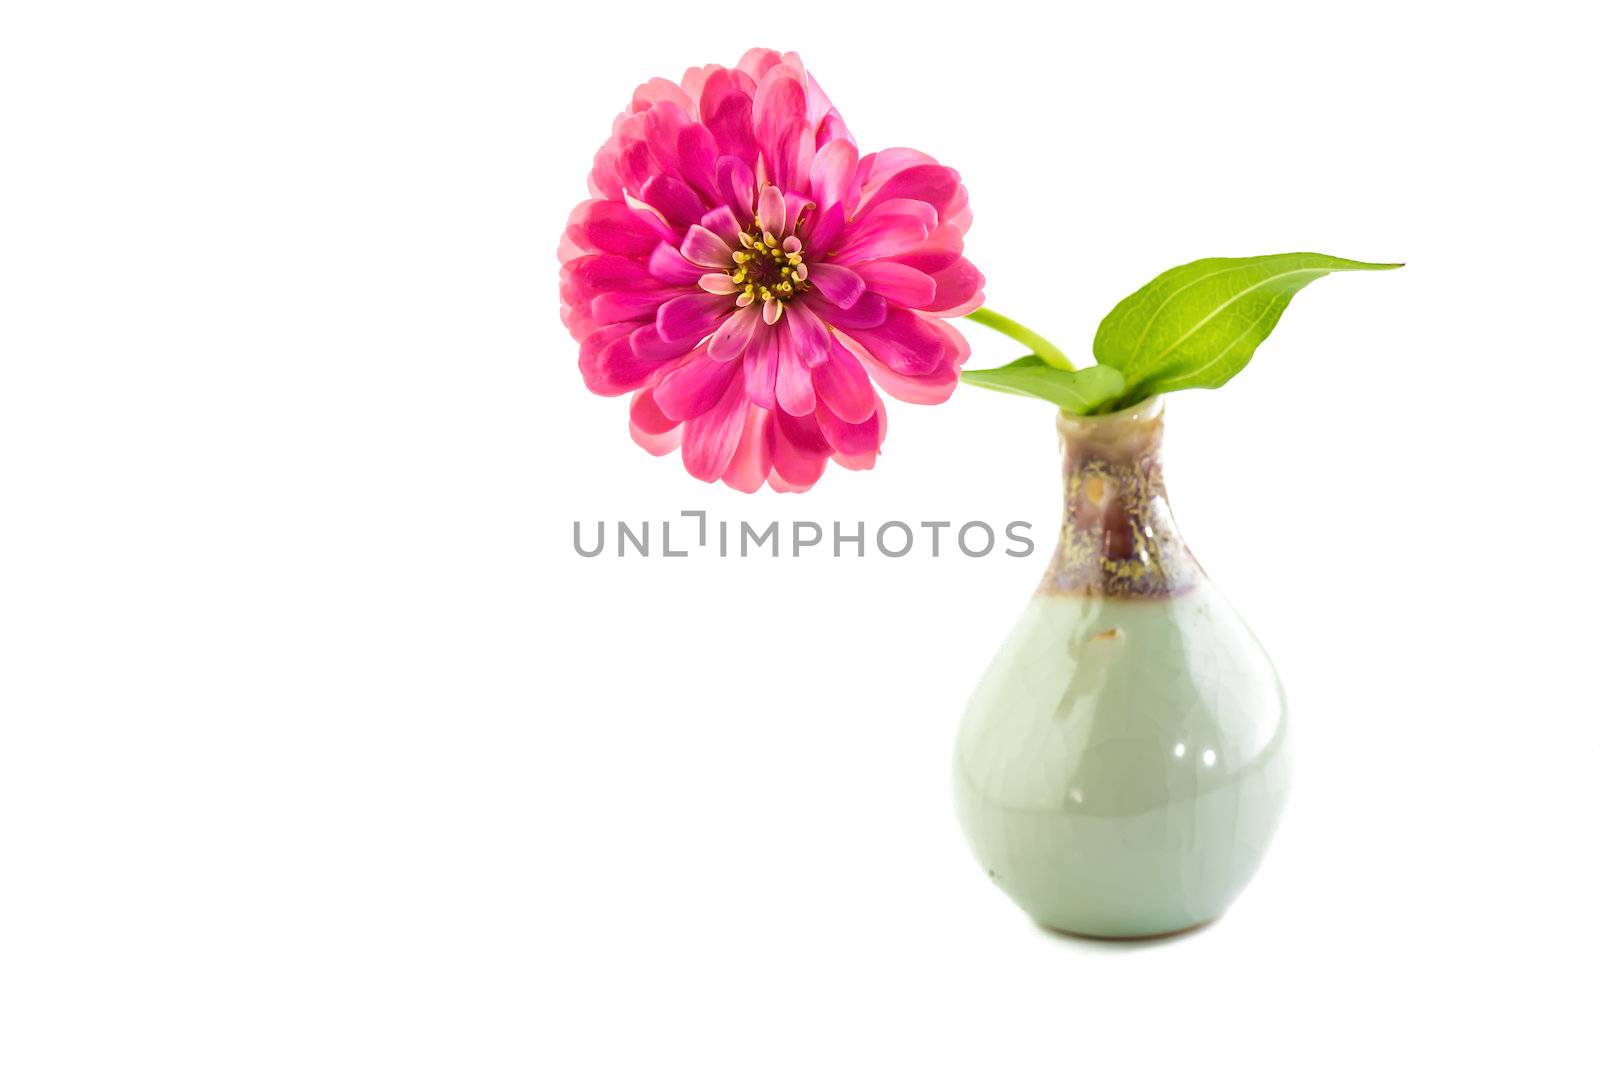 pink zinnia n a green vase on white background.